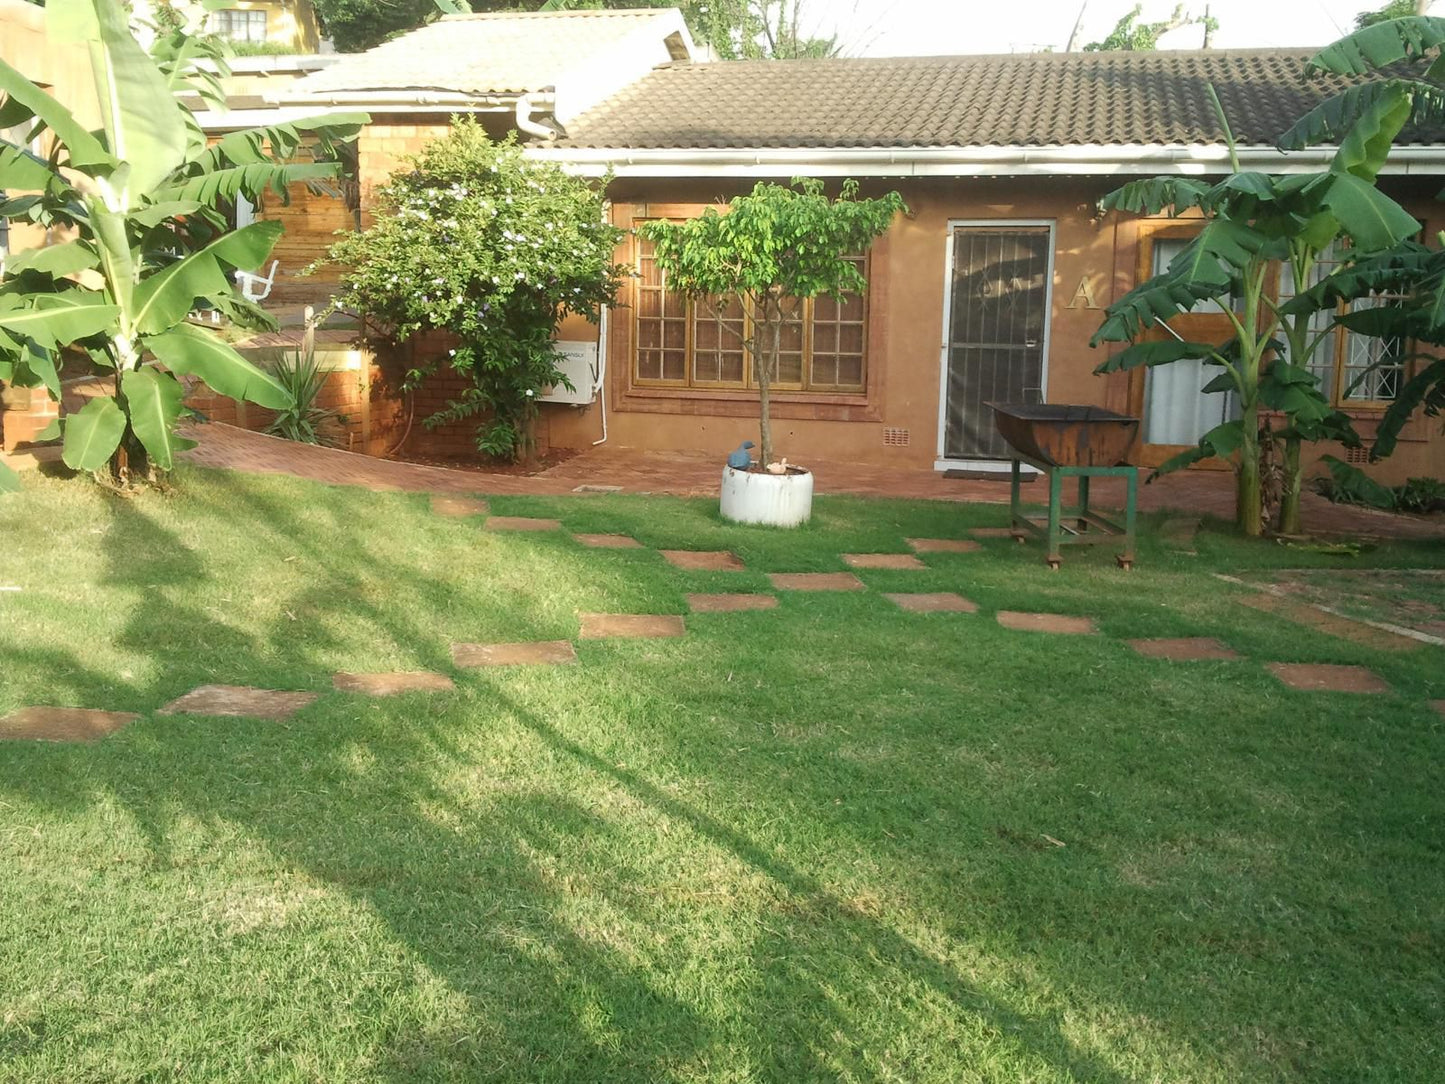 North Lodge Cottages Self Catering Park Hill Durban Kwazulu Natal South Africa Palm Tree, Plant, Nature, Wood, Garden